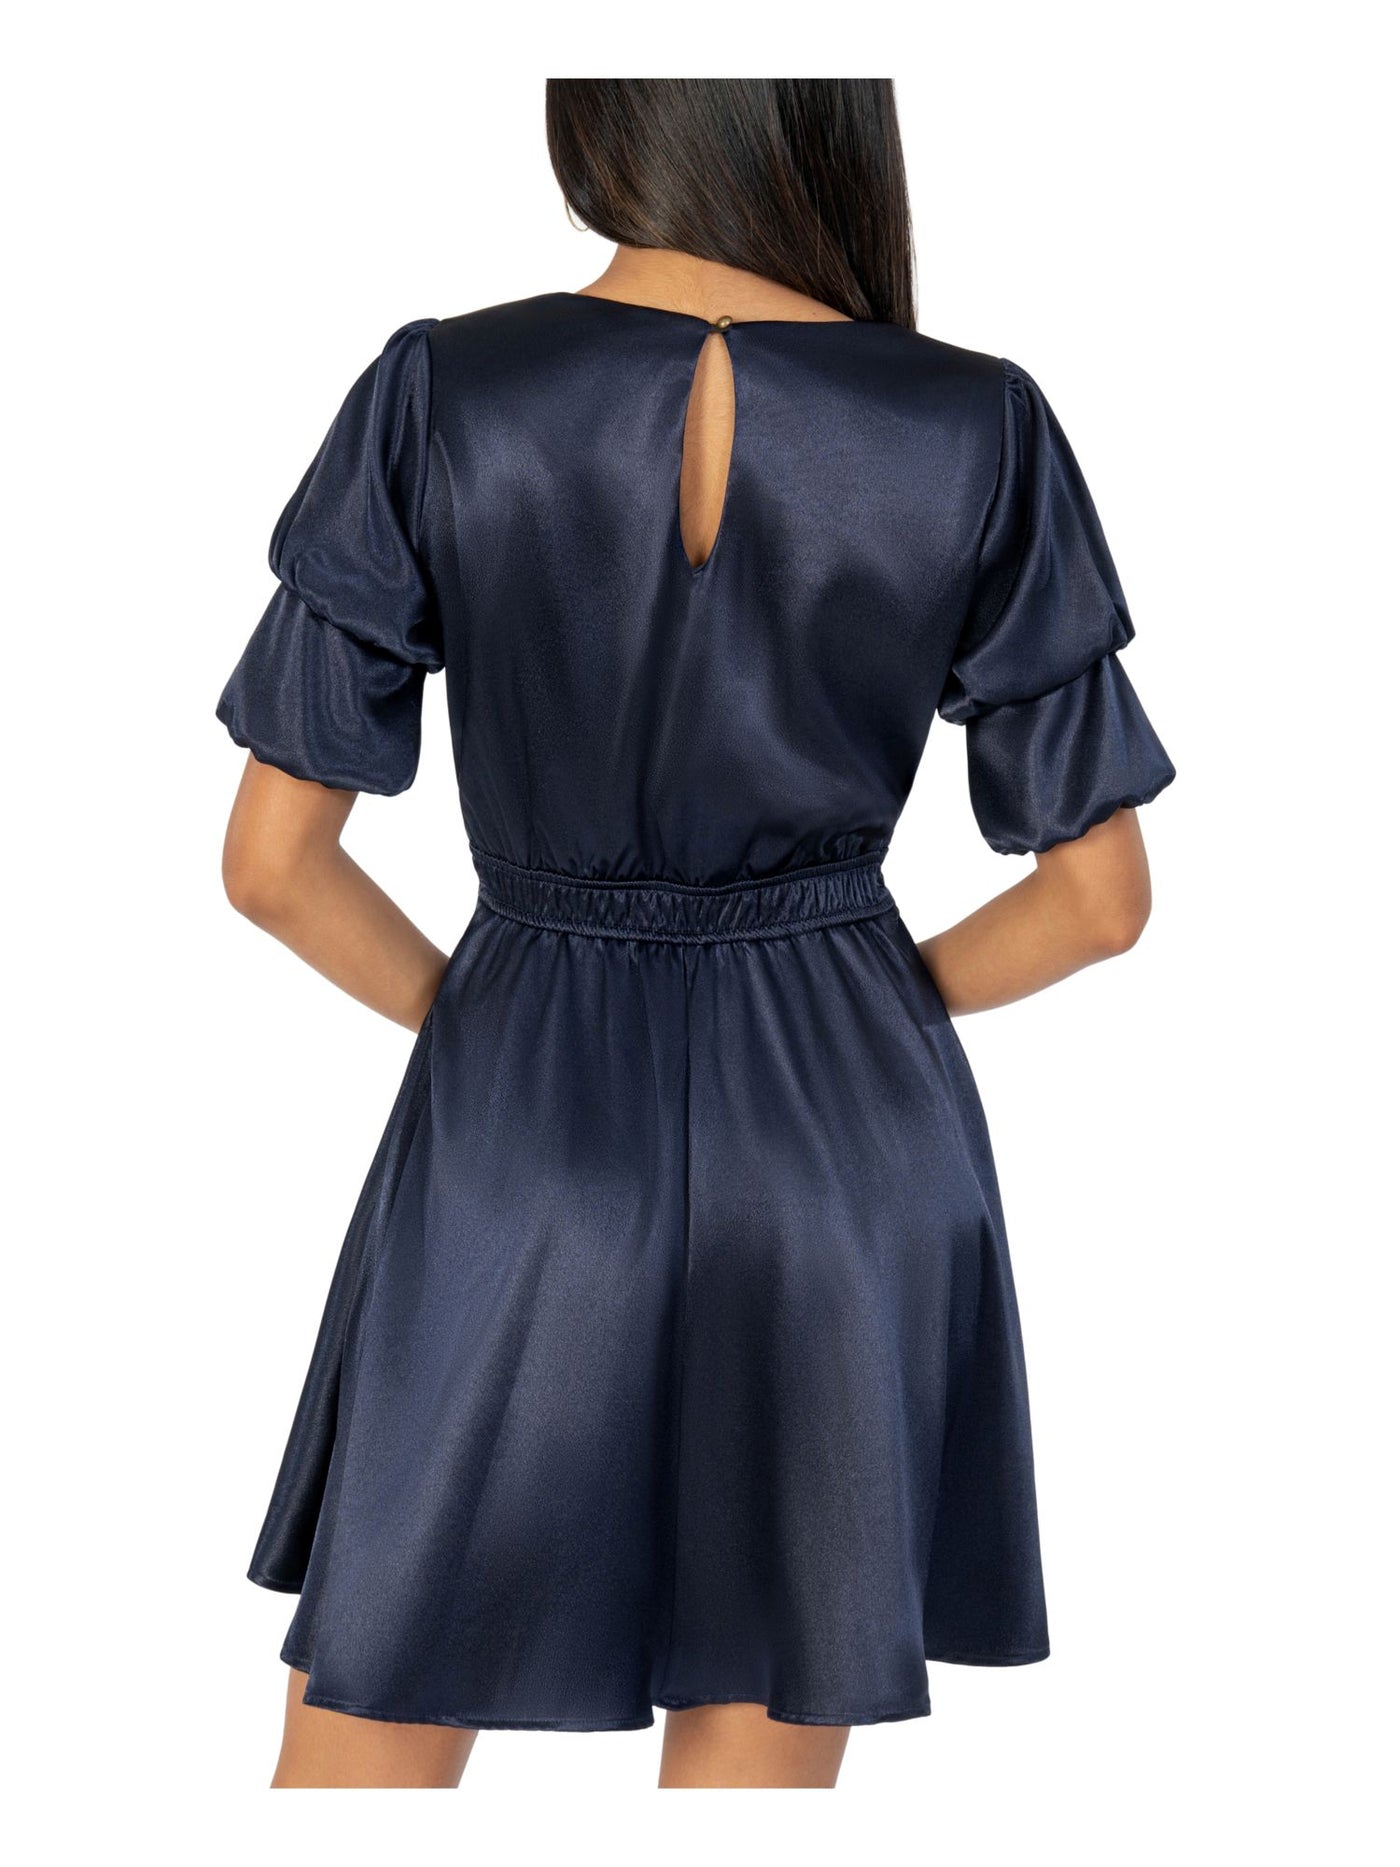 SPEECHLESS Womens Navy Pocketed Darted Satin Short Sleeve V Neck Short Party Fit + Flare Dress Juniors 15